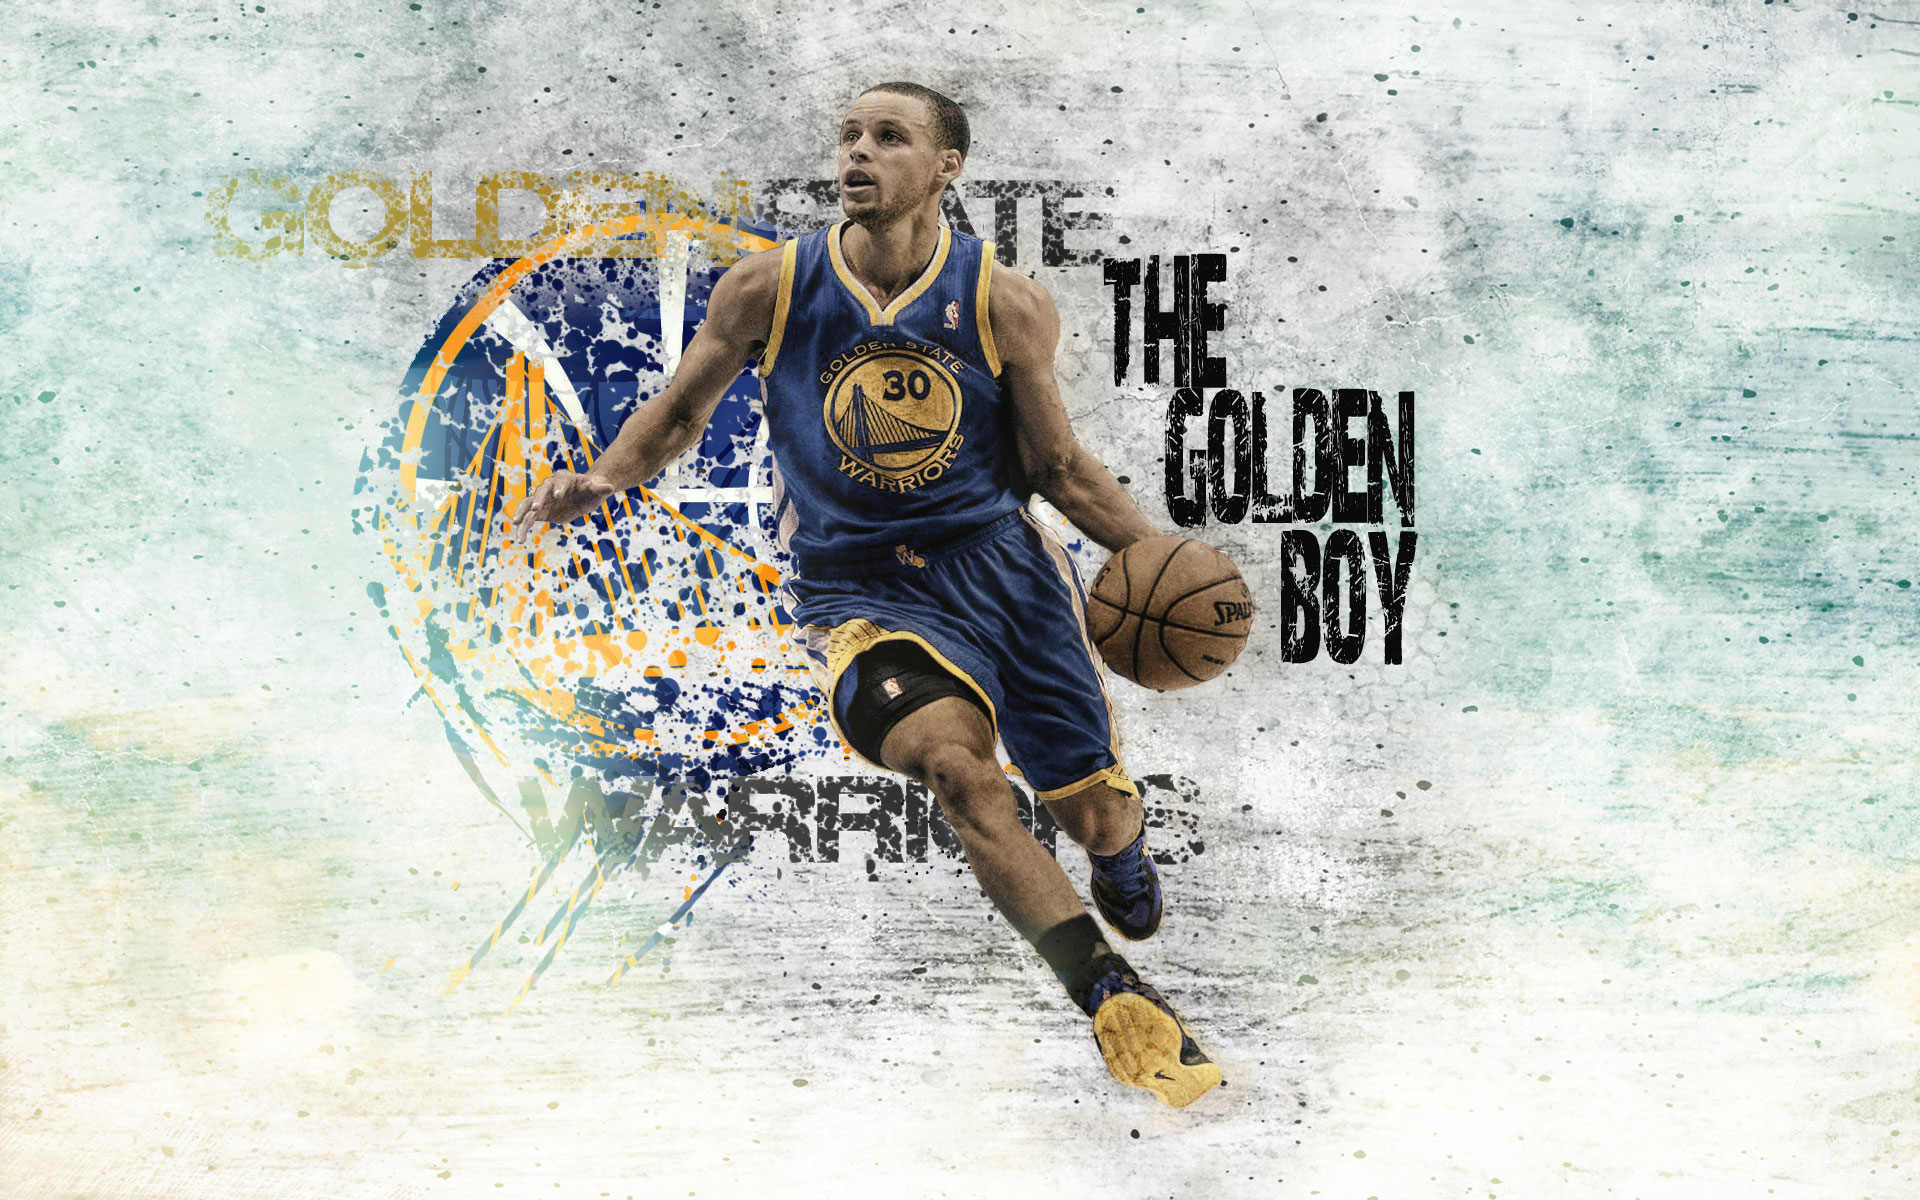 Stephen Curry HD Wallpaper and Background